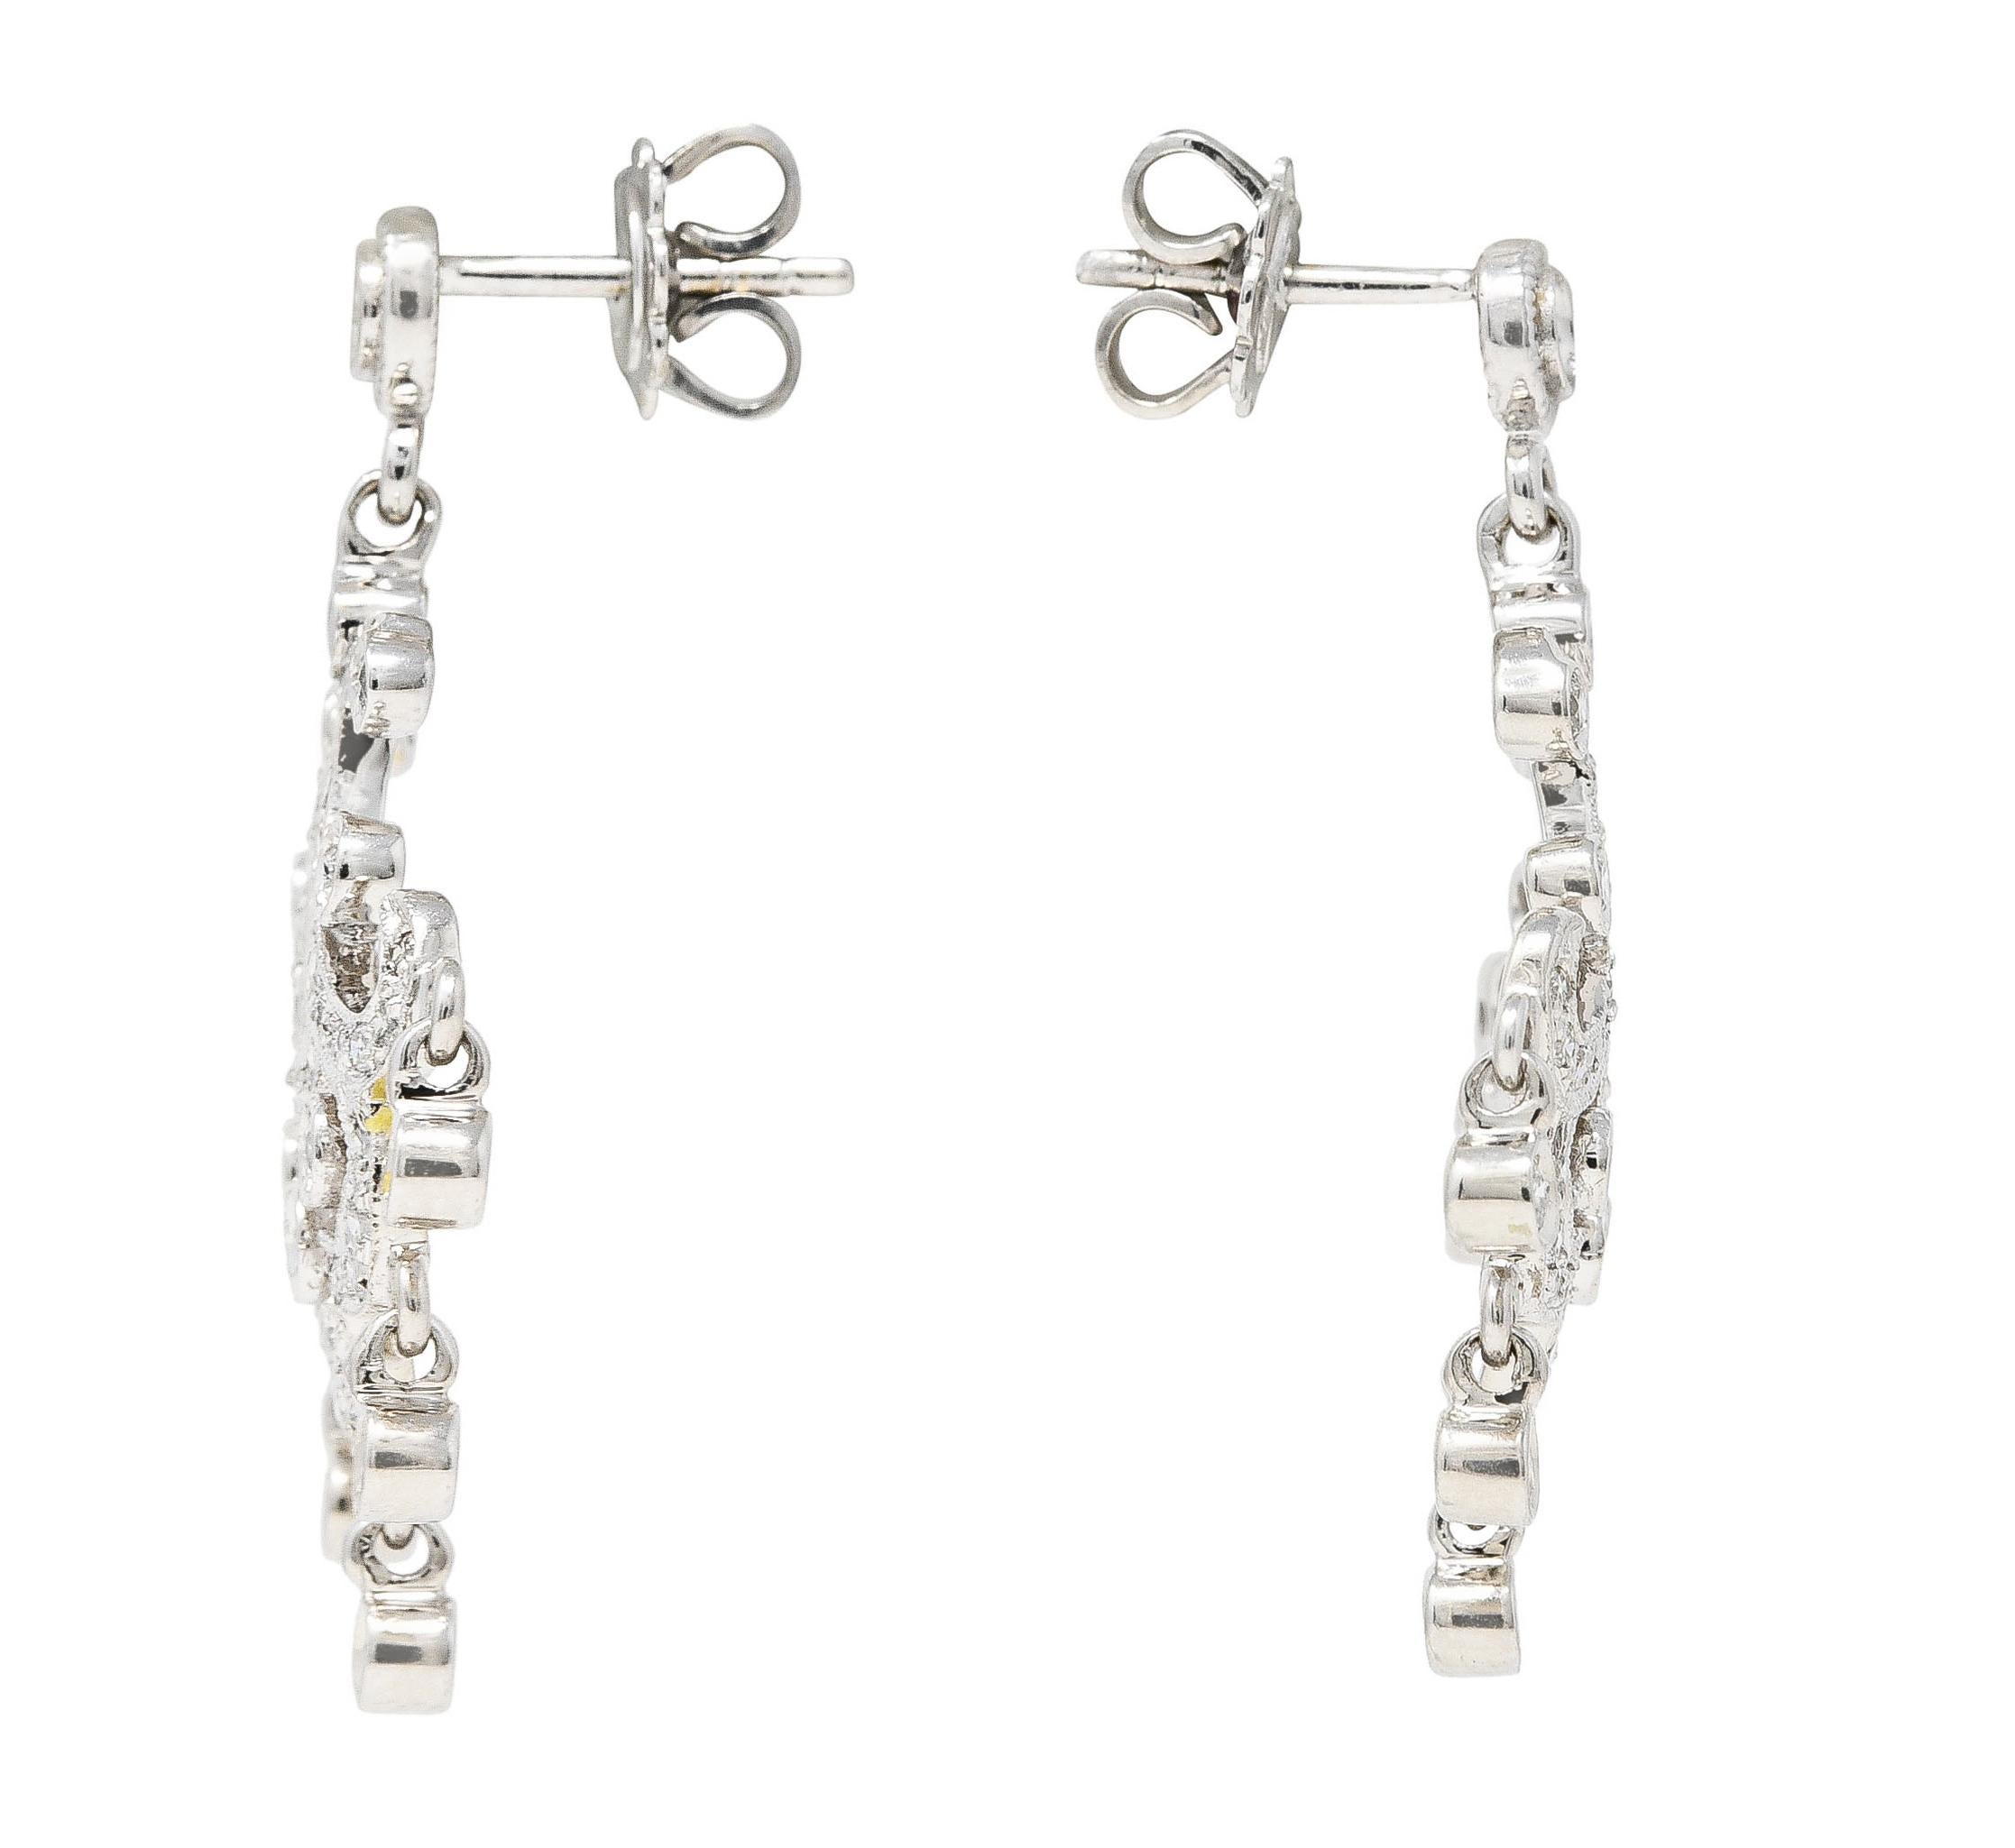 Earrings are designed with a circular surmount. Suspending an ornate chandelier drop with articulated droplets. Set throughout by round brilliant cut diamonds. Weighing in total approximately 1.50 carats - G/H color with SI clarity. Completed by